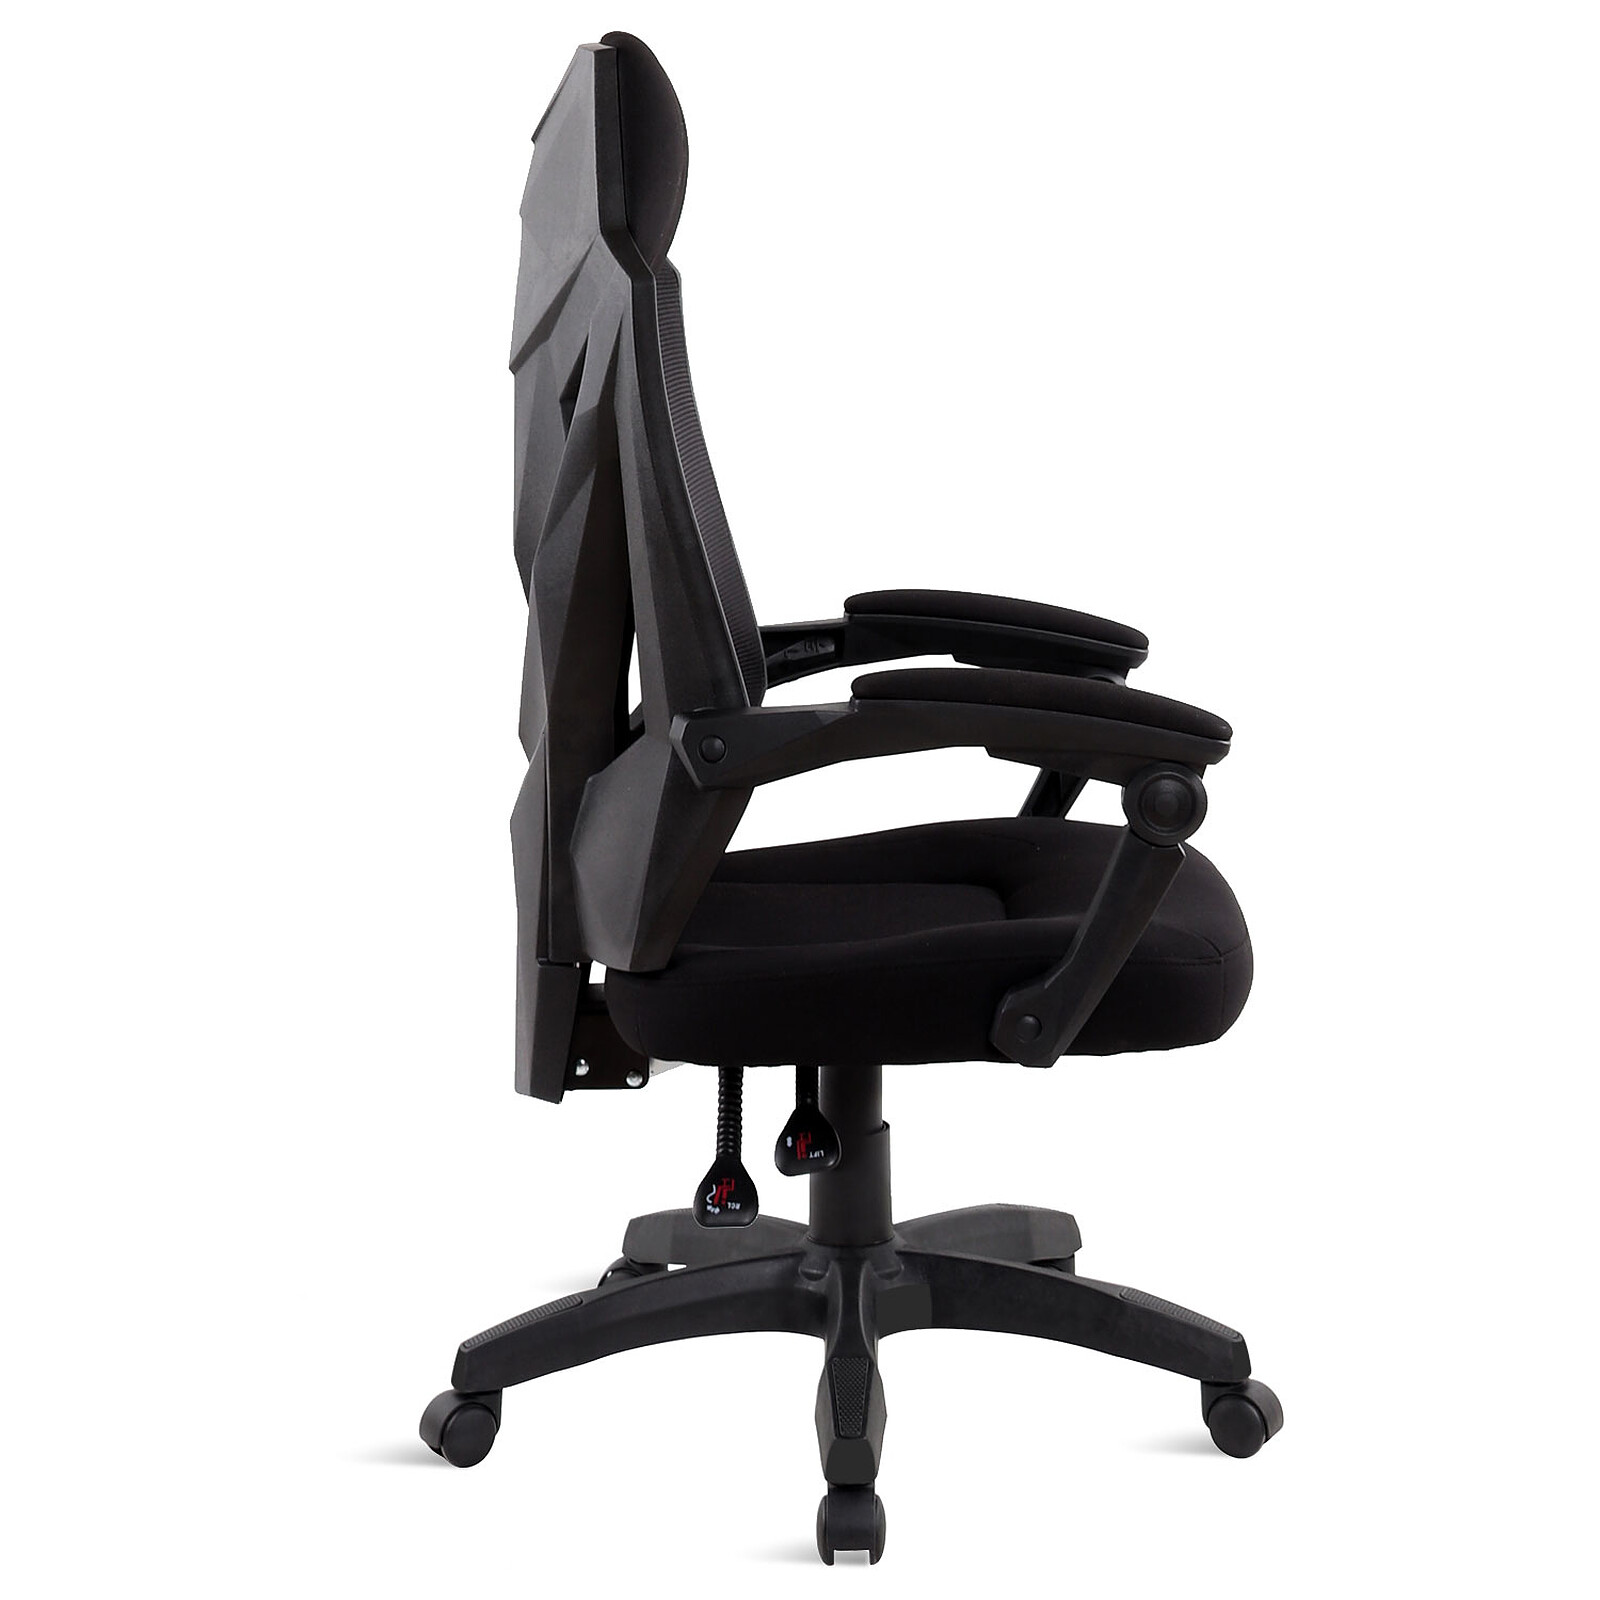 Subsonic Siège COD Call of Duty - Fauteuil gamer - LDLC